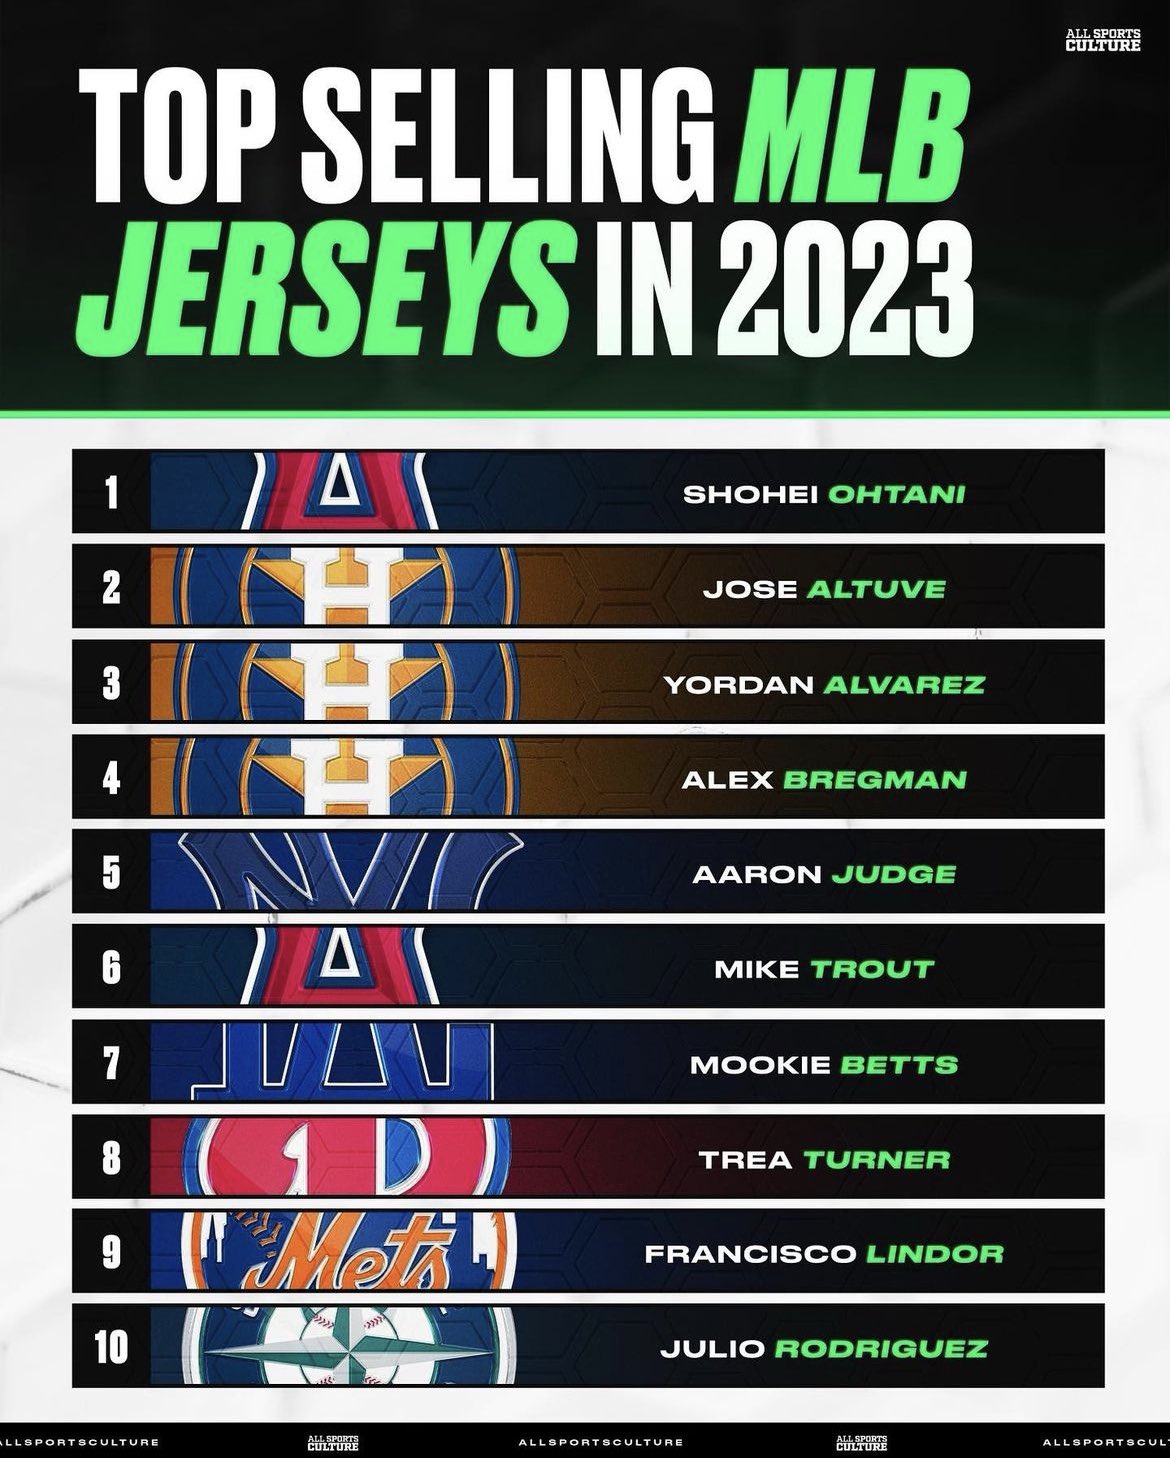 All Sports Culture on Twitter "Top 10 selling MLB jerseys in 2023 1